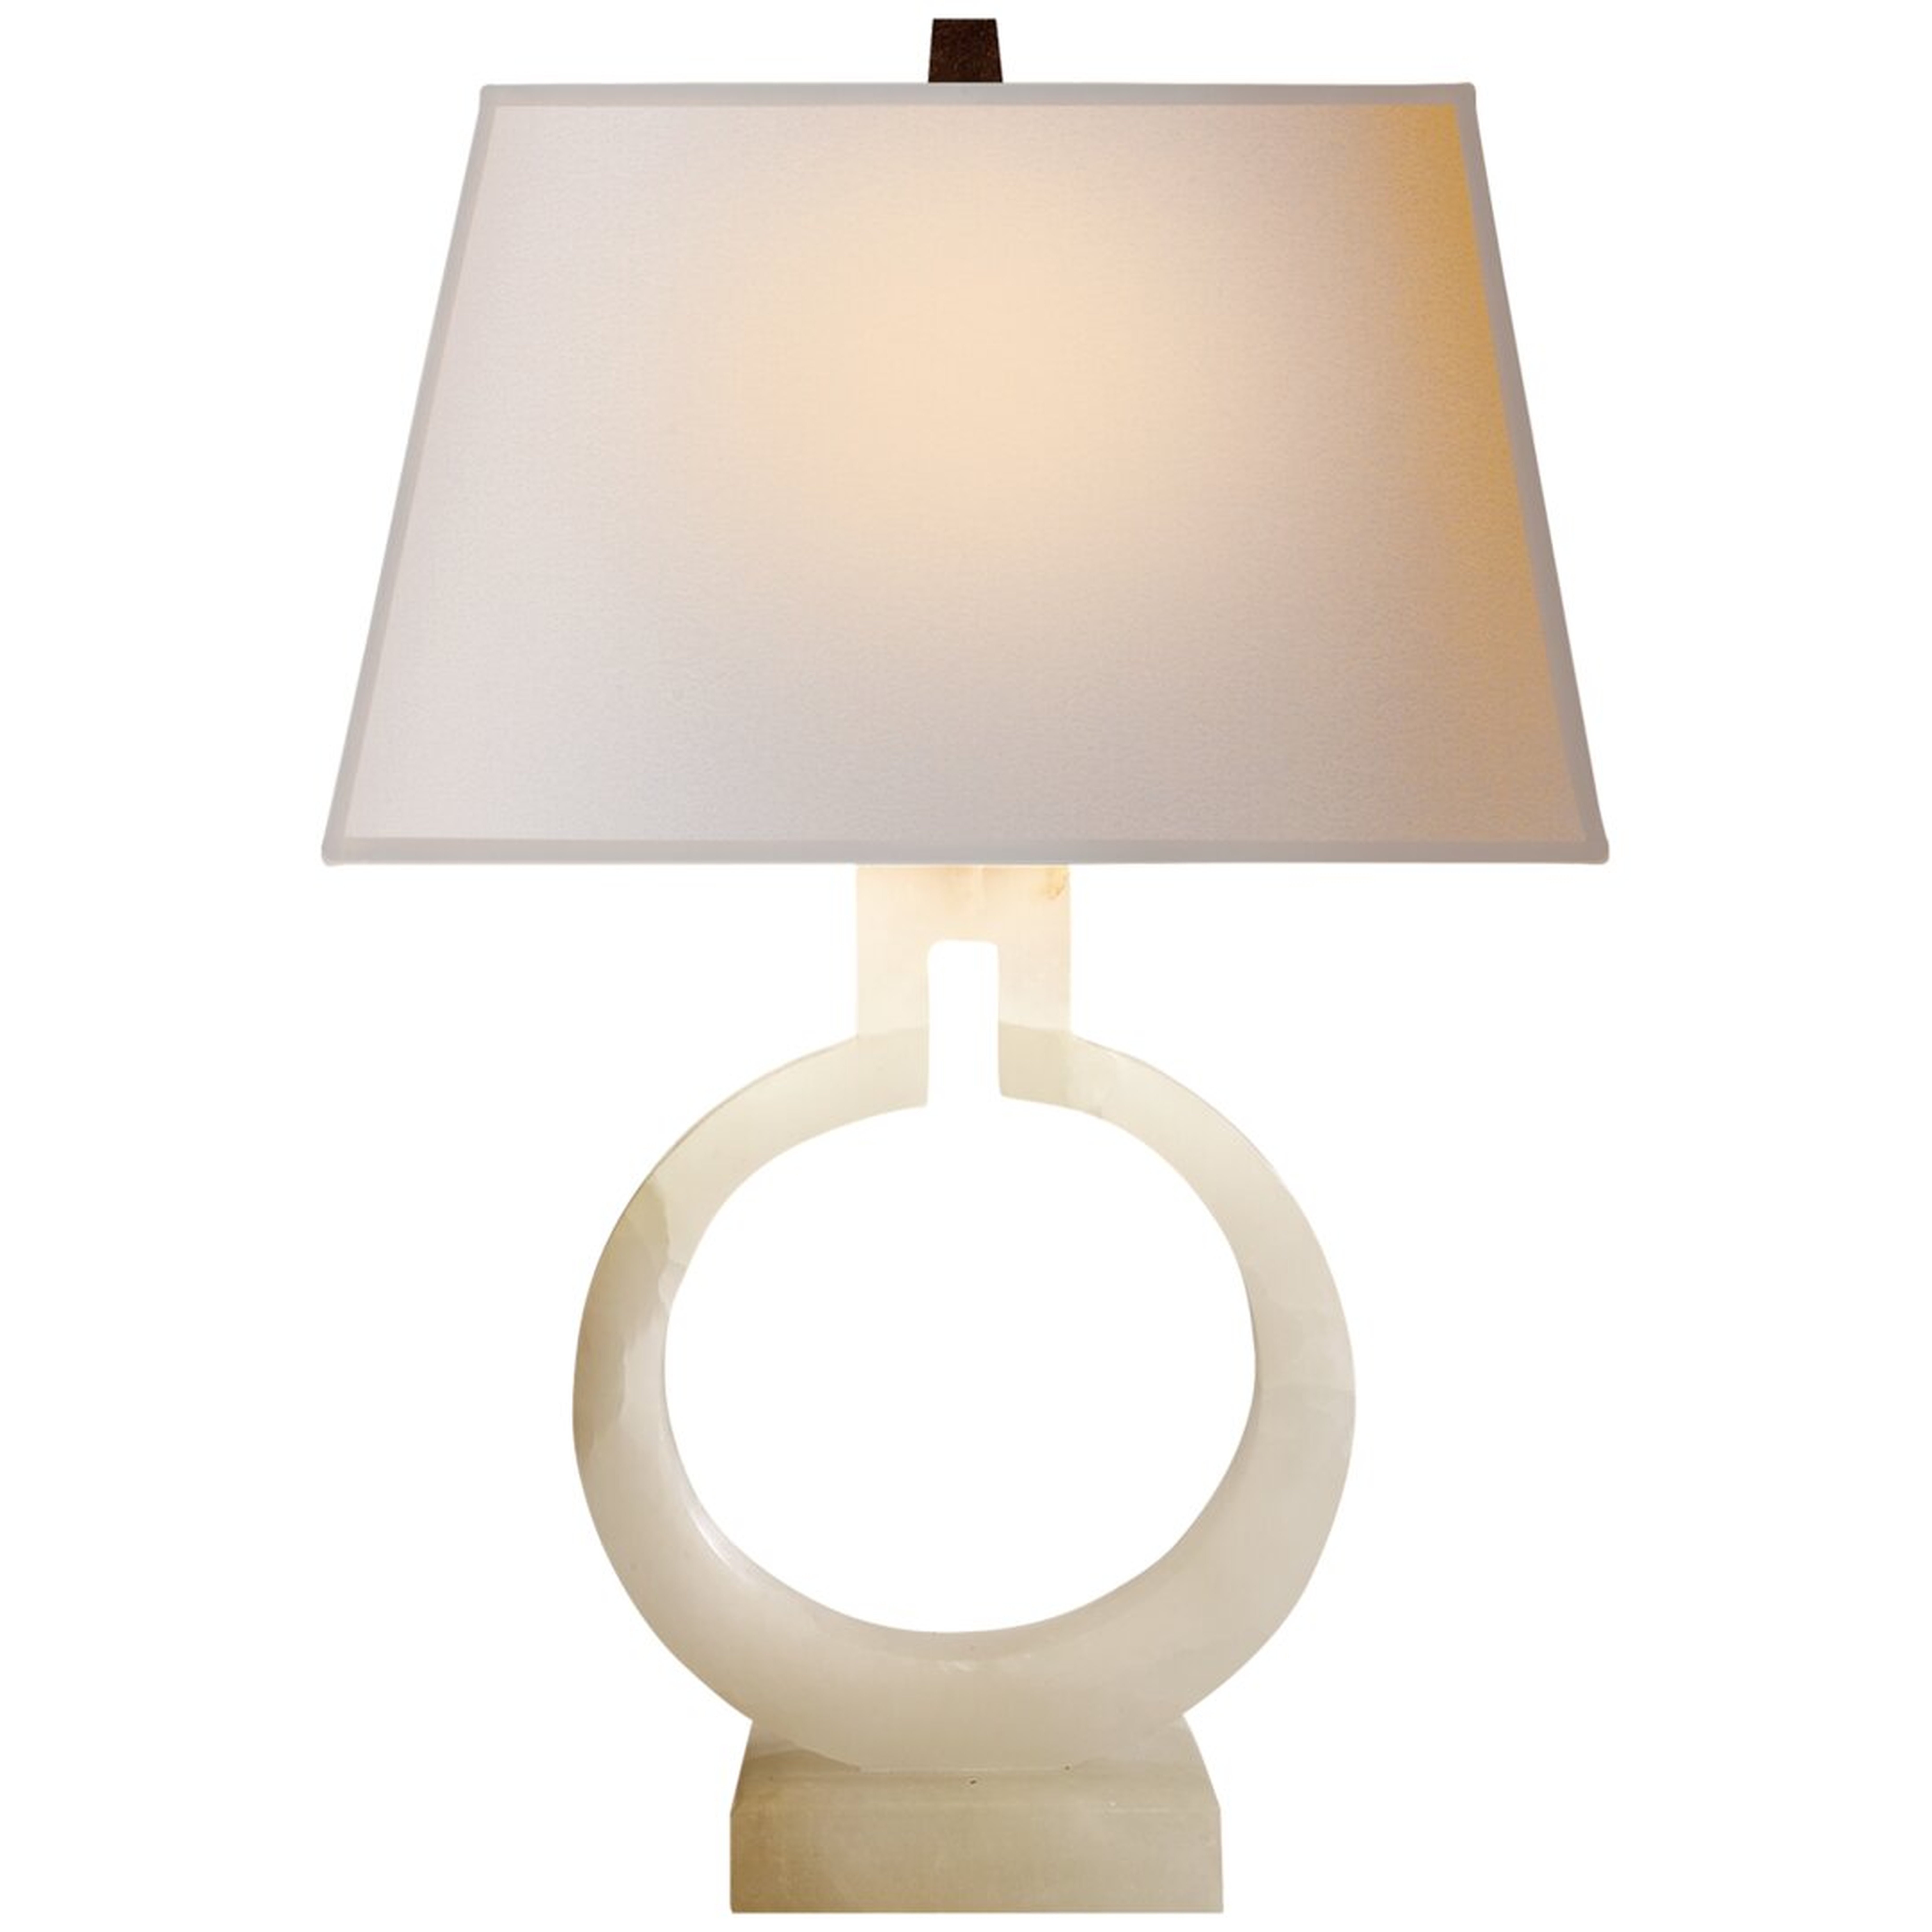 "Visual Comfort Ring Form Table Lamp by E. F. Chapman" - Perigold